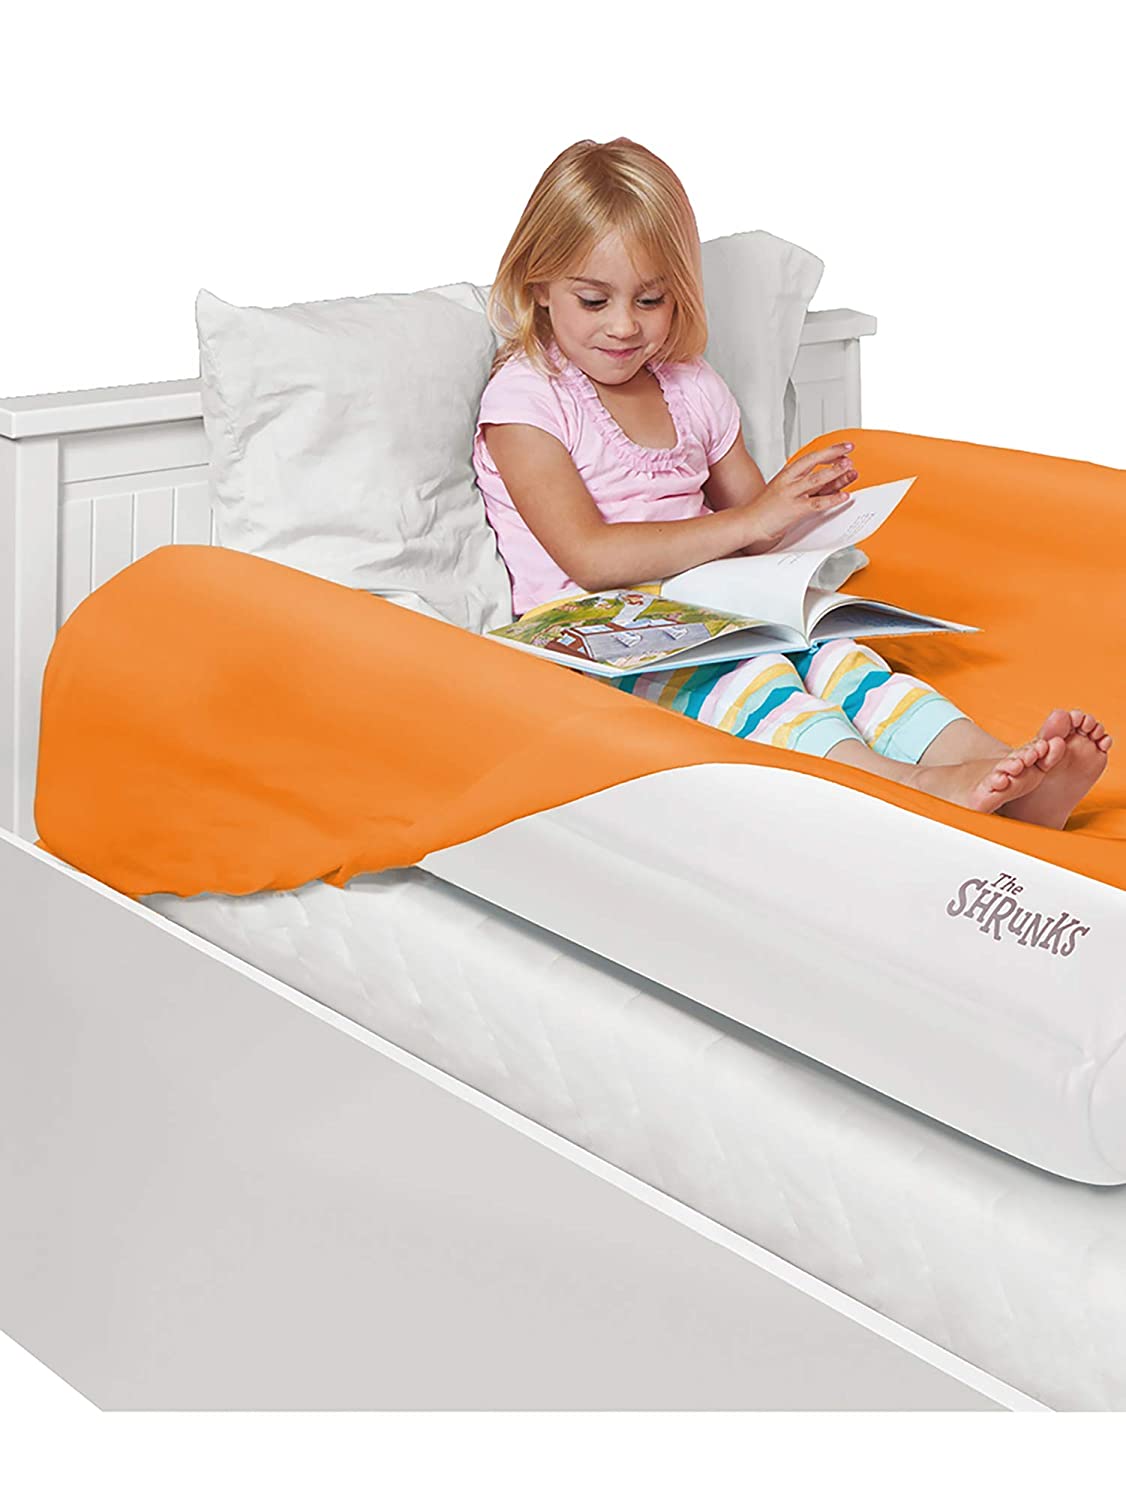 The Shrunks Inflatable Kids Bed Rails